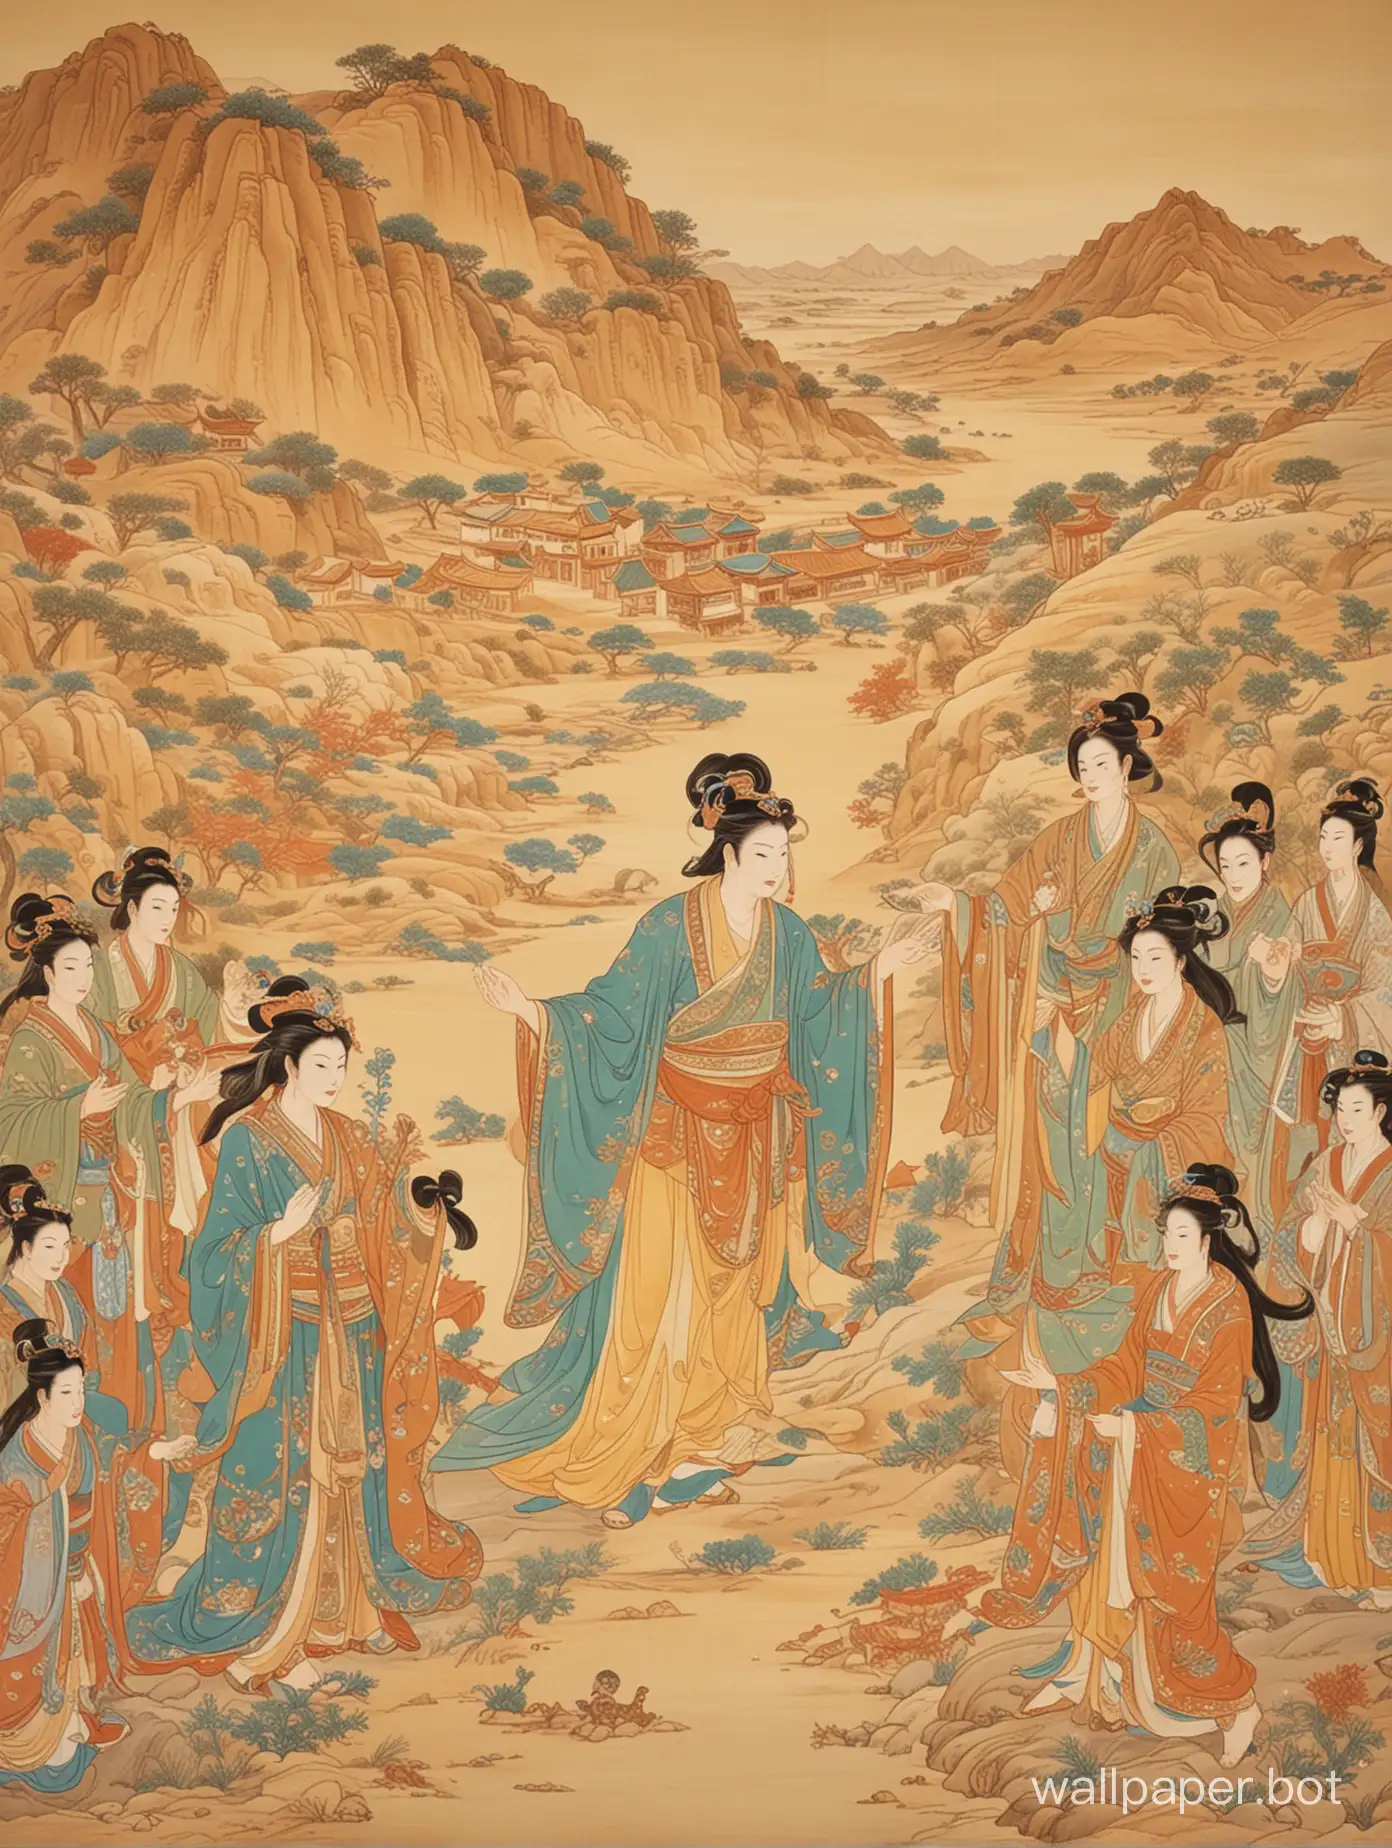 Dunhuang, characters, scenery, tradition, painting,